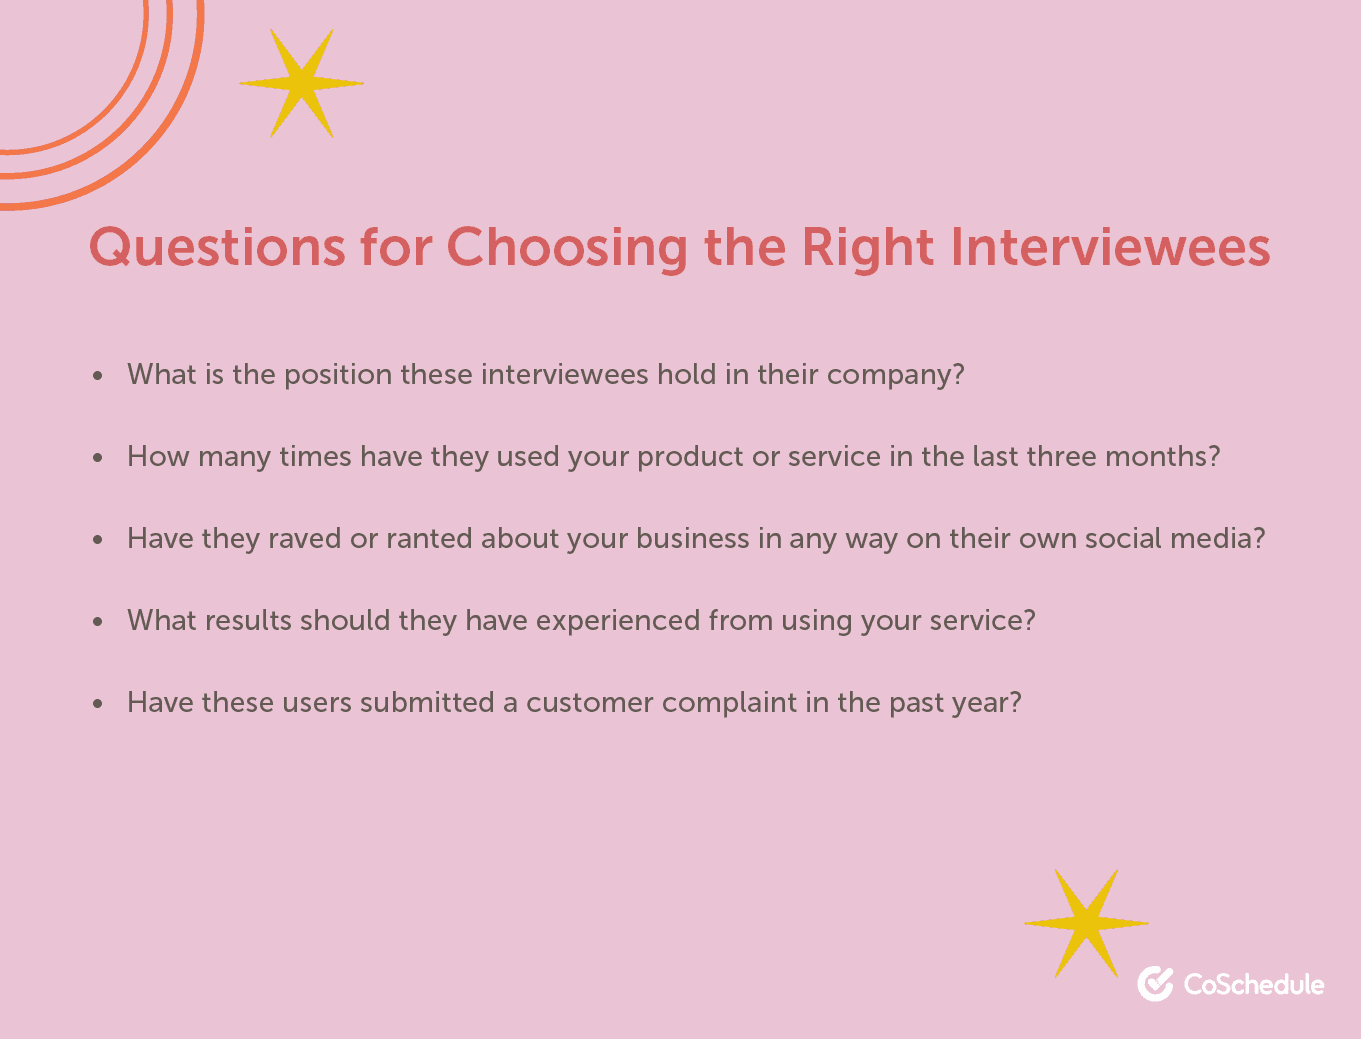 Questions for choosing the best interviewees